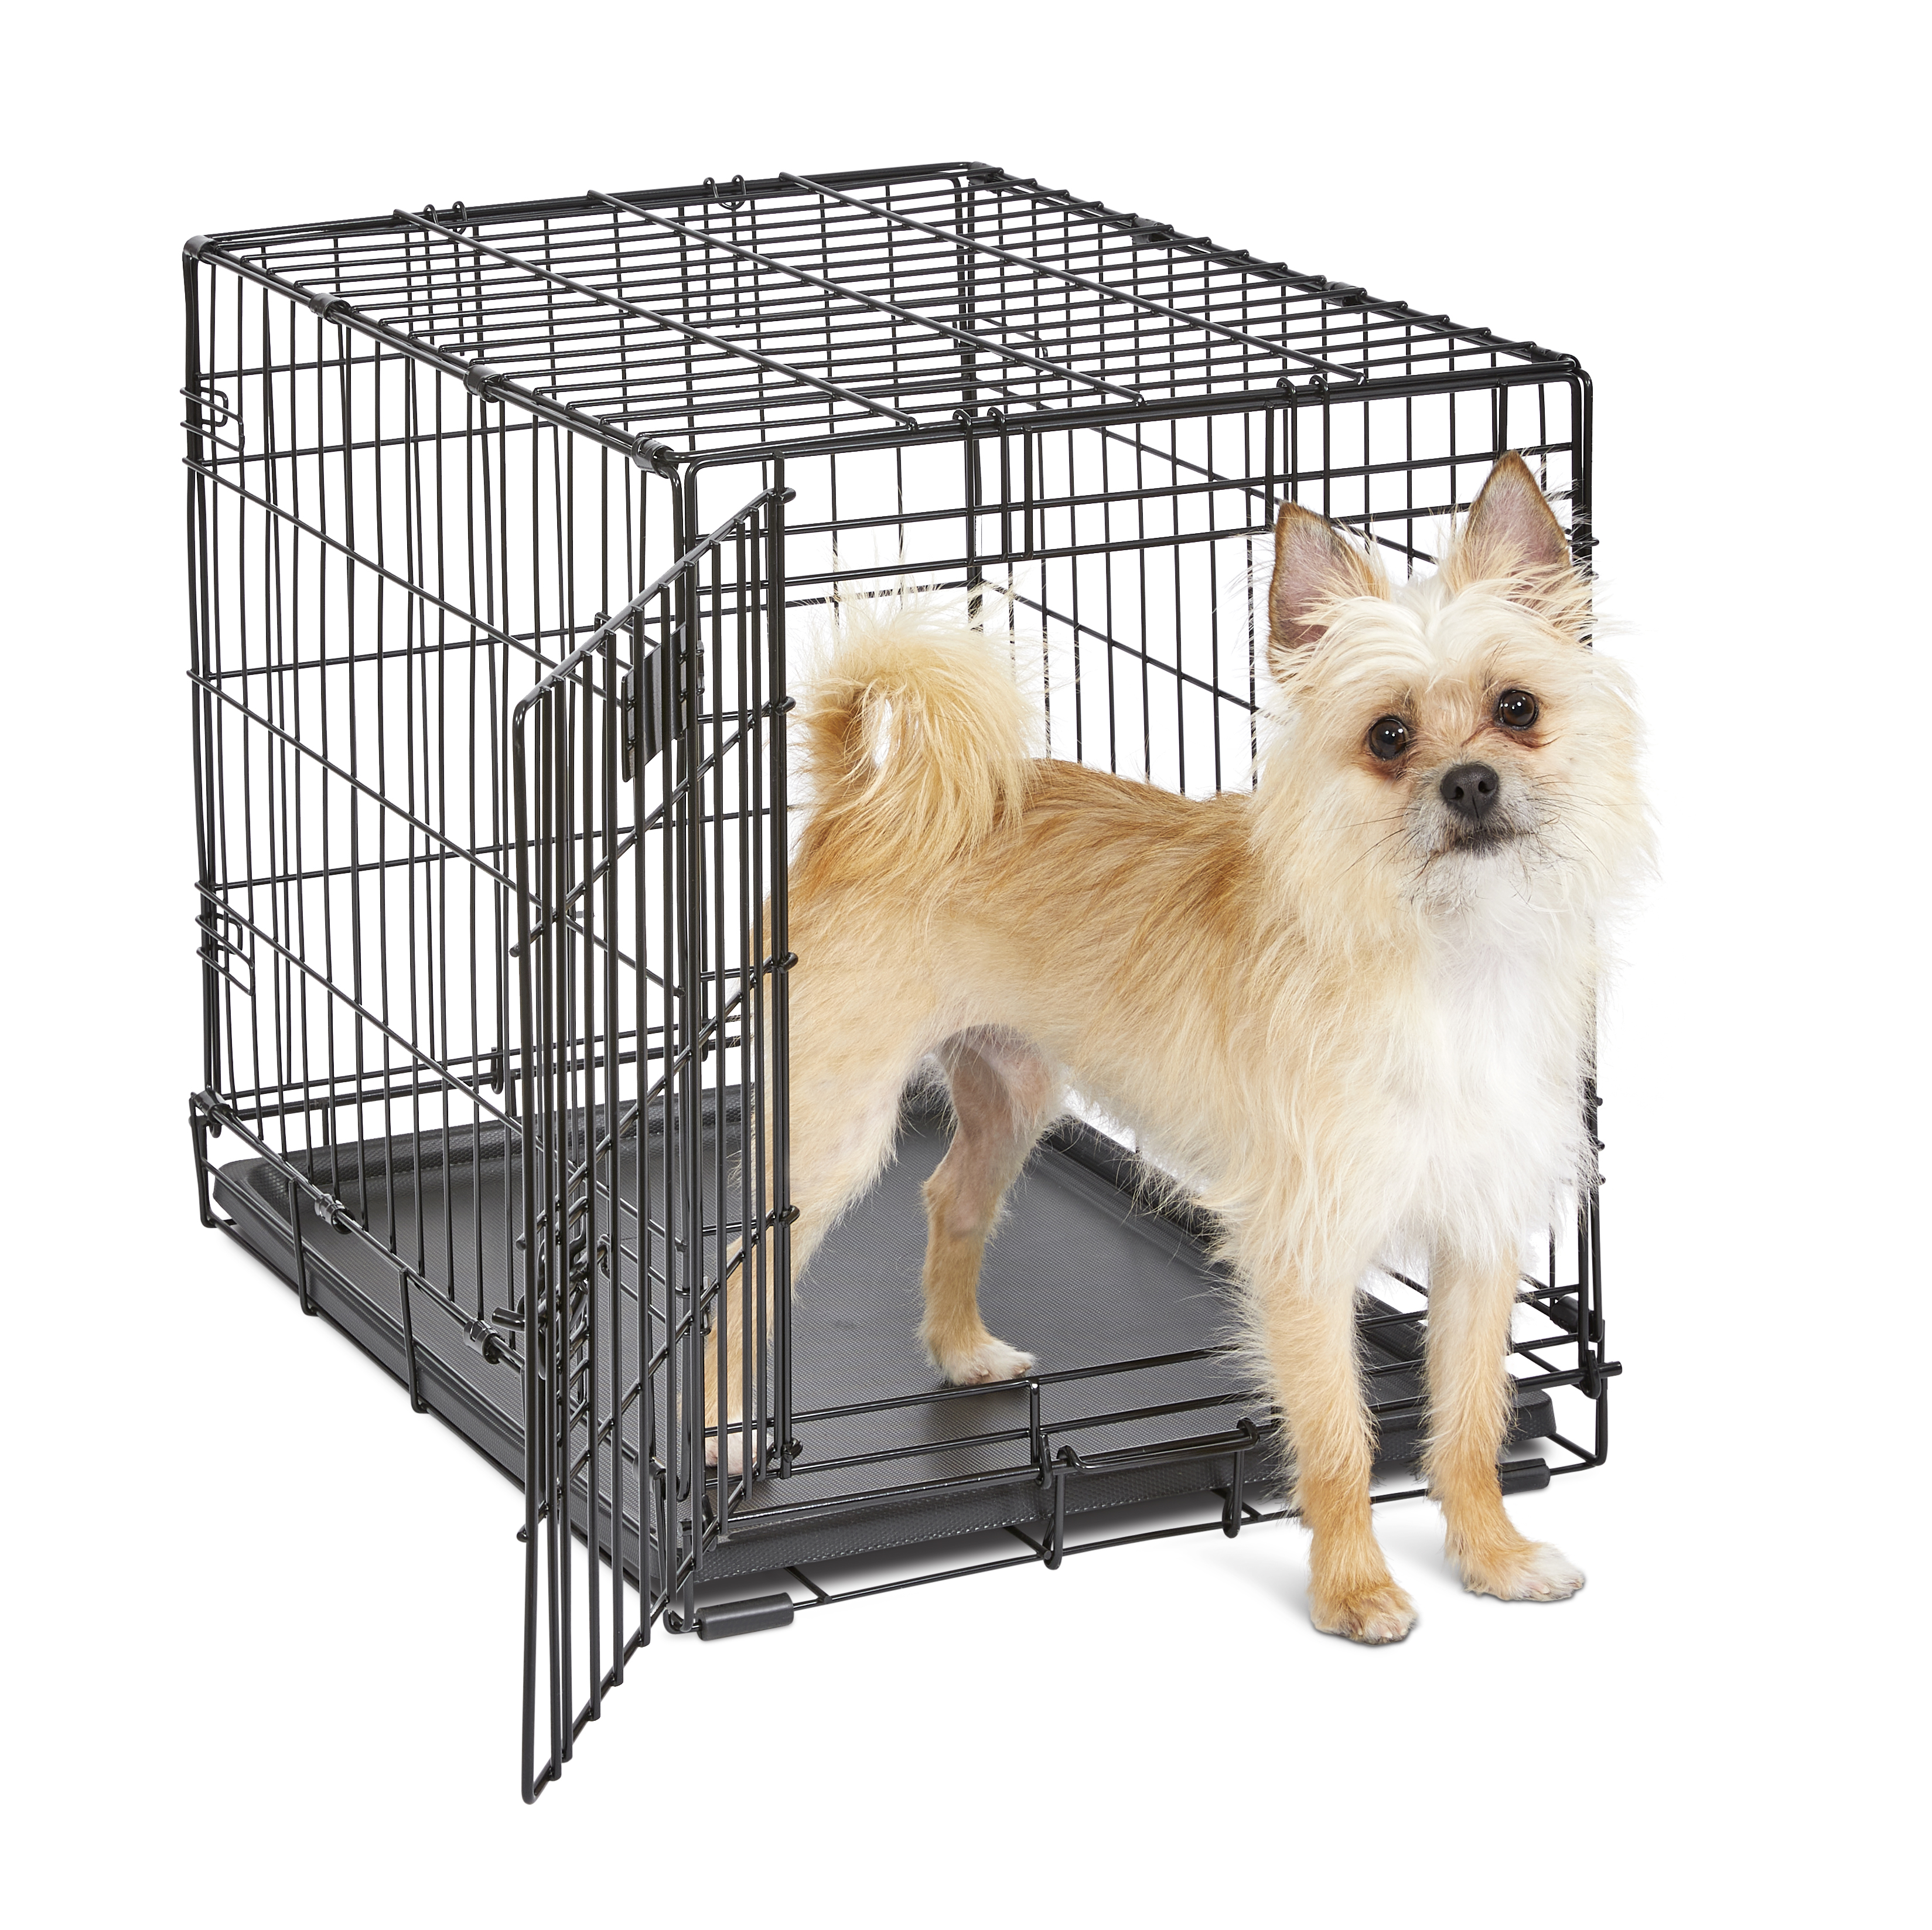 MidWest Homes for Pets Single Door iCrate Metal Dog Crate, 24" - image 2 of 8